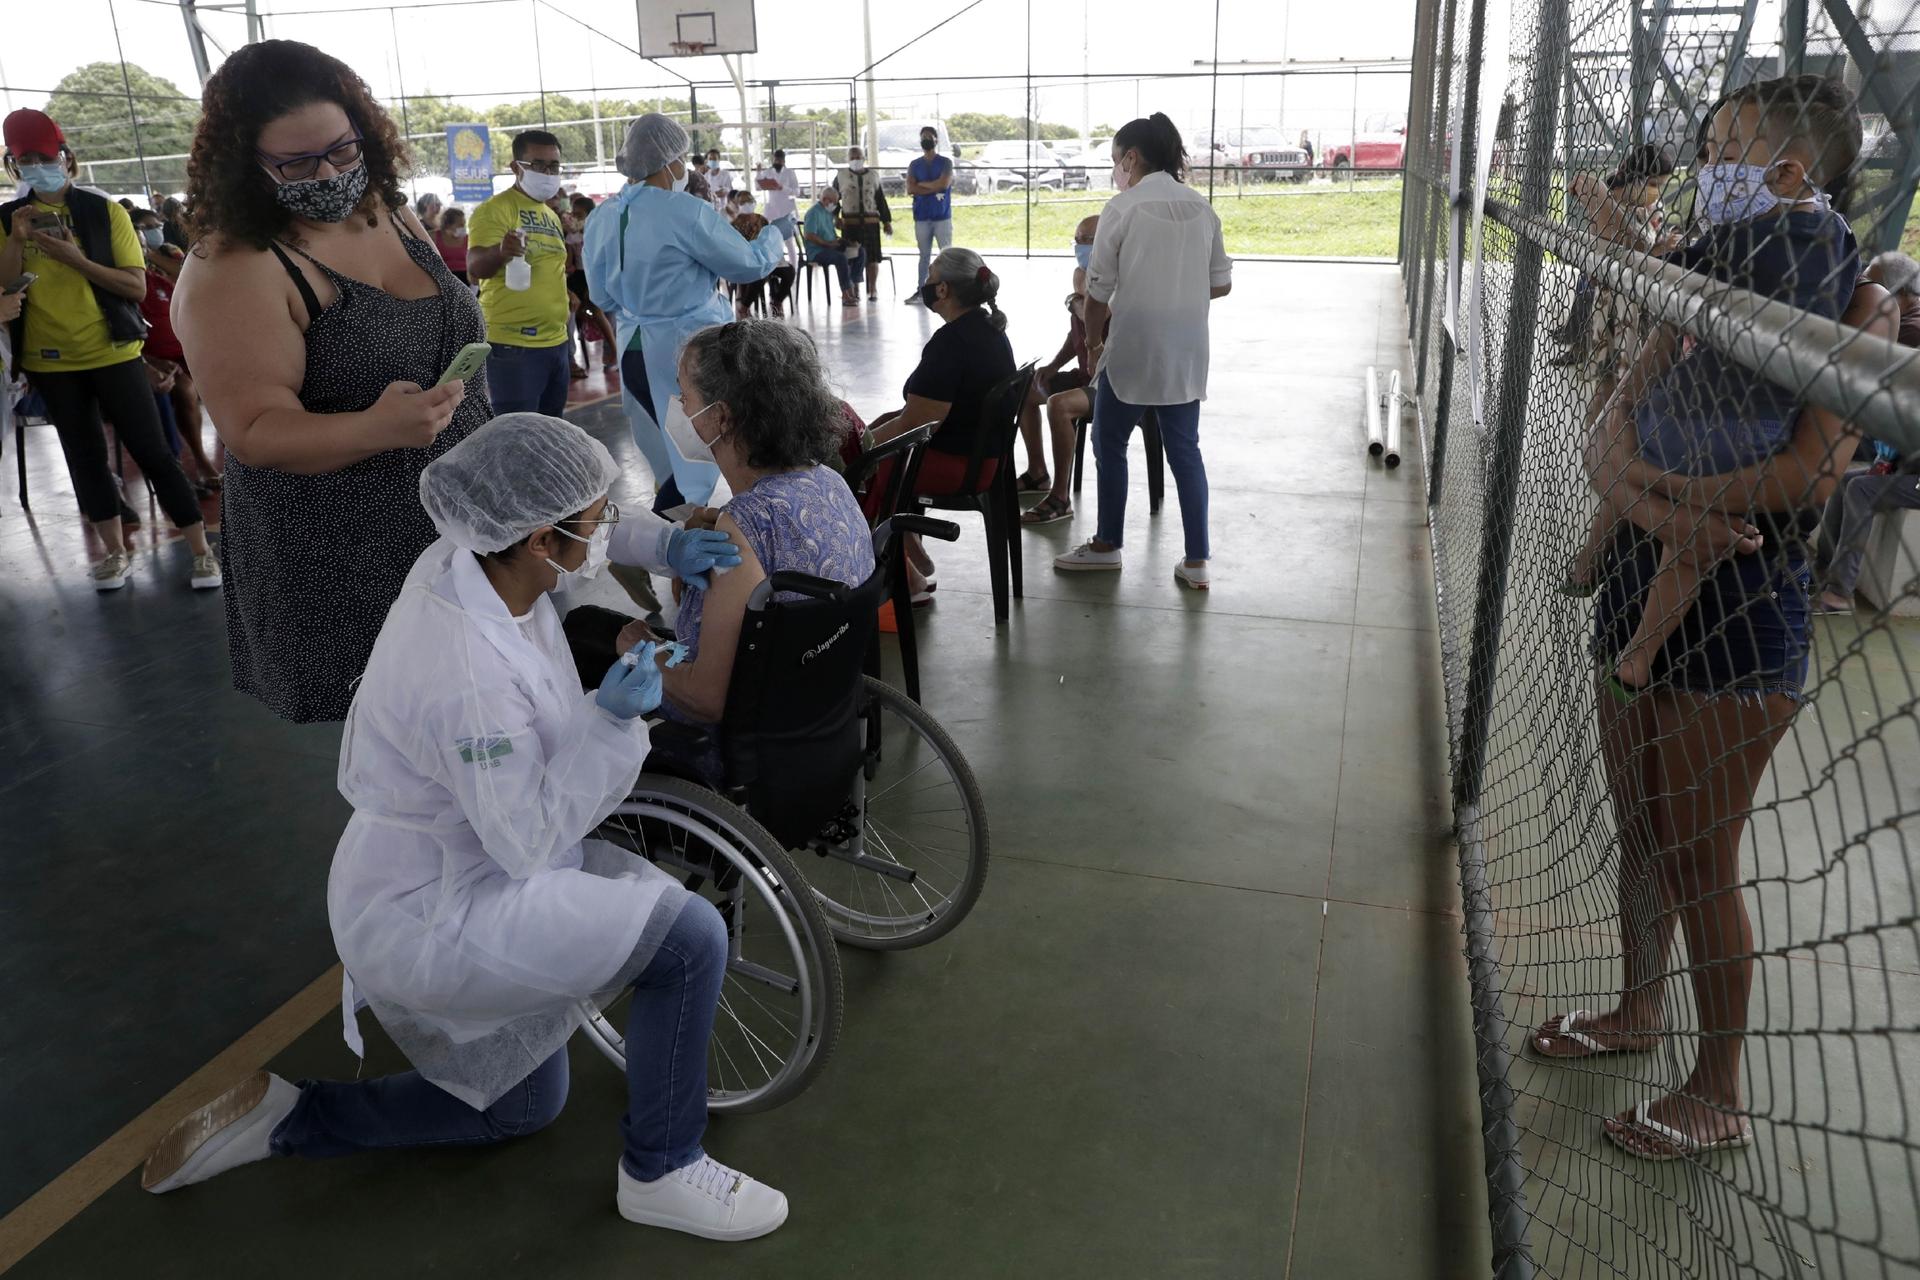 A health worker inoculates a woman at a COVID-19 vaccination point for priority elderly persons in the Ceilandia neighborhood, on the outskirts of Brasilia, Brazil, March 22, 2021.